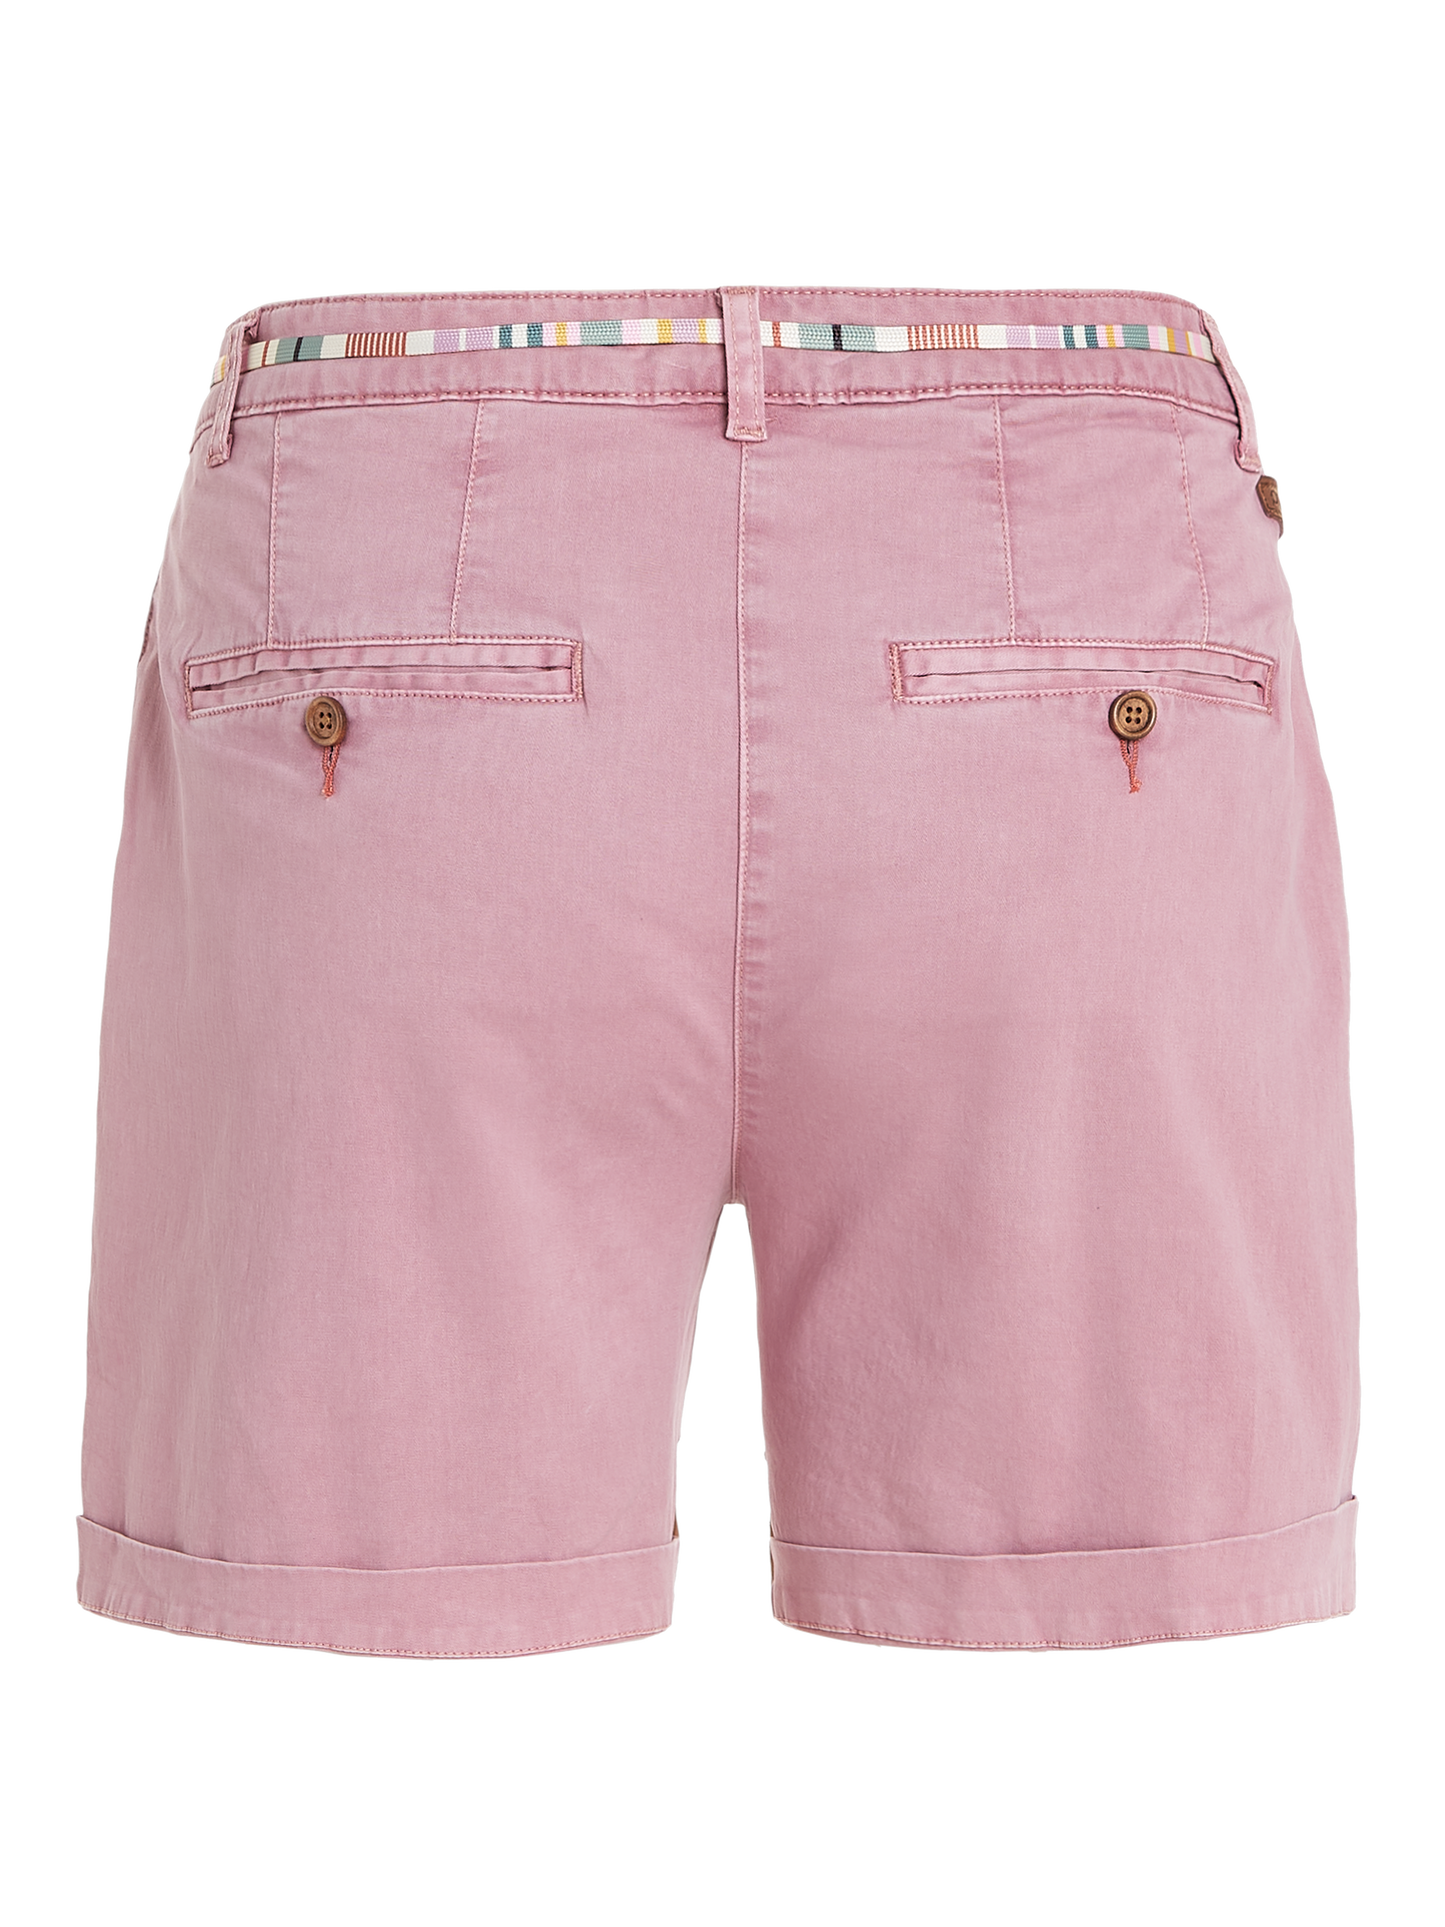 Protest Annick Shorts in Dusky Rose